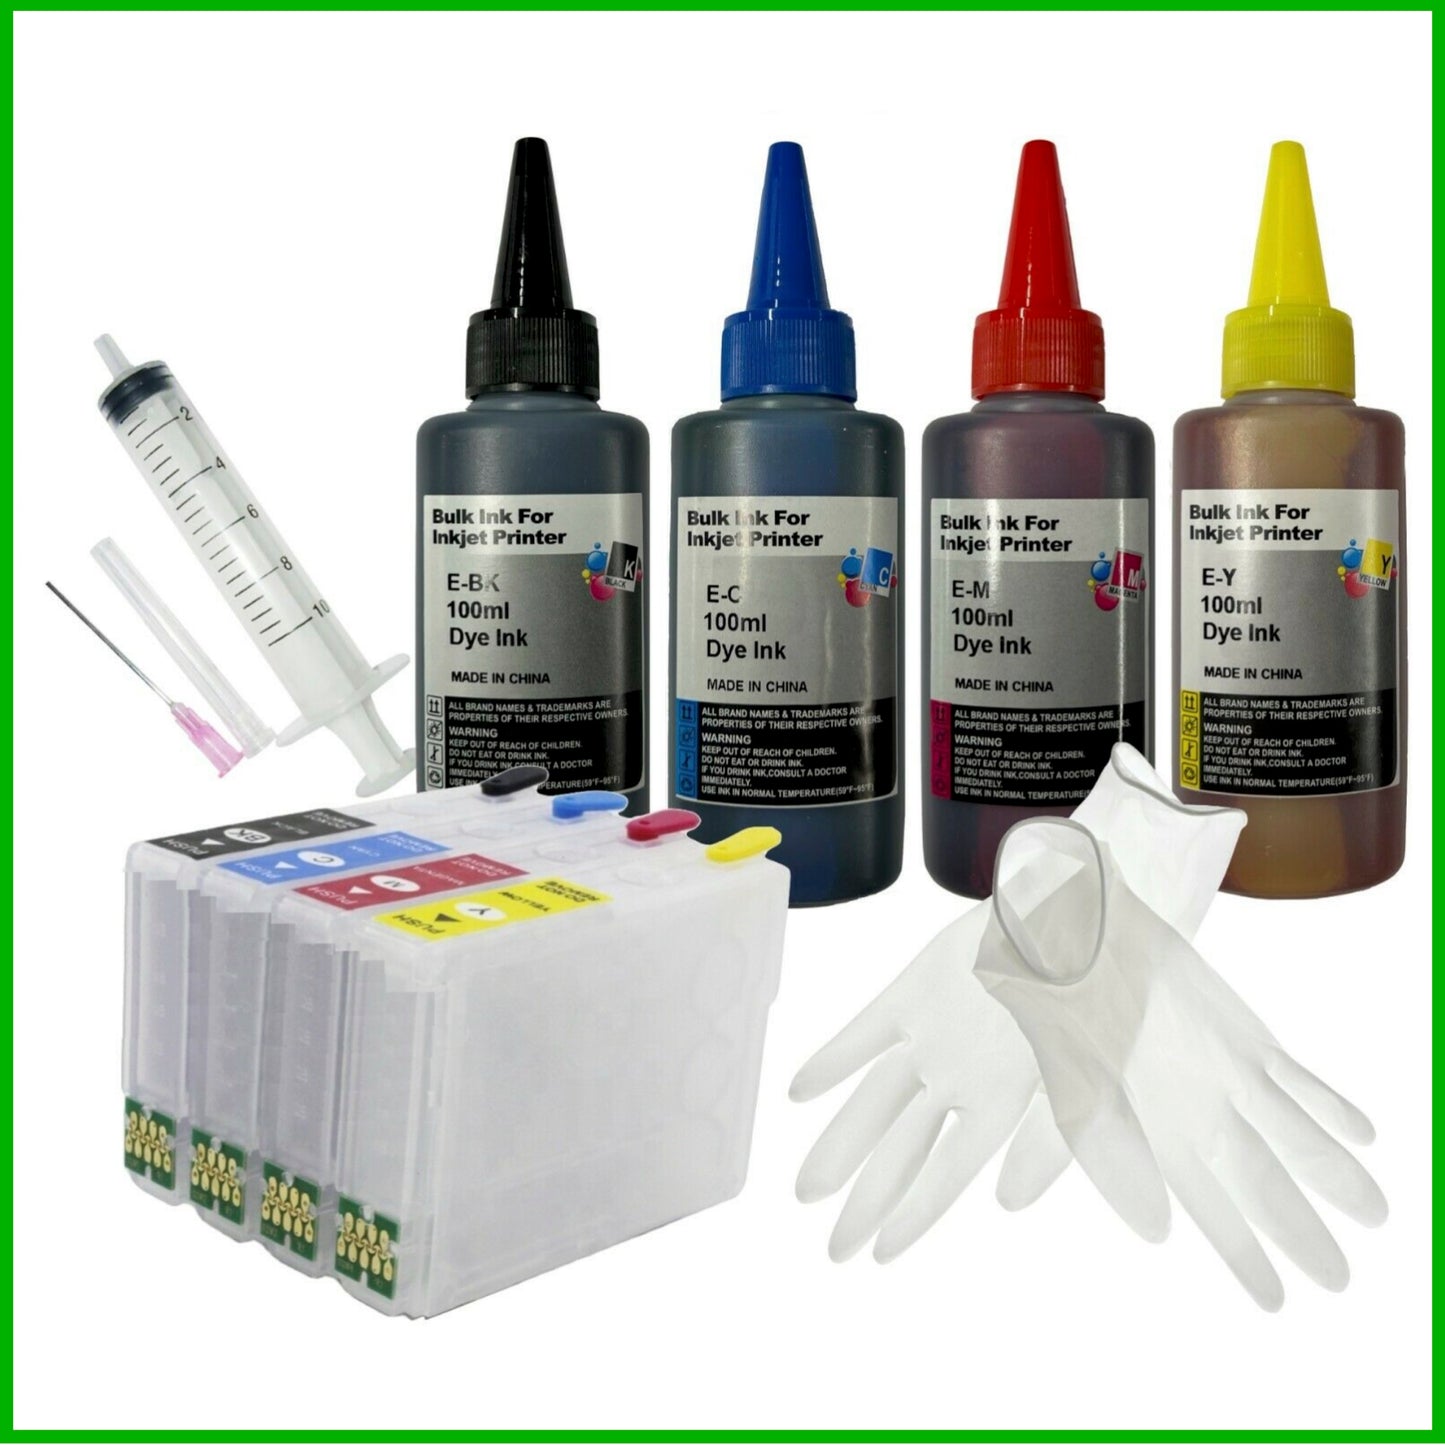 Refill Starter Kit - 603XL Cartridges with ARC Chip & Ink for Epson Expression Home